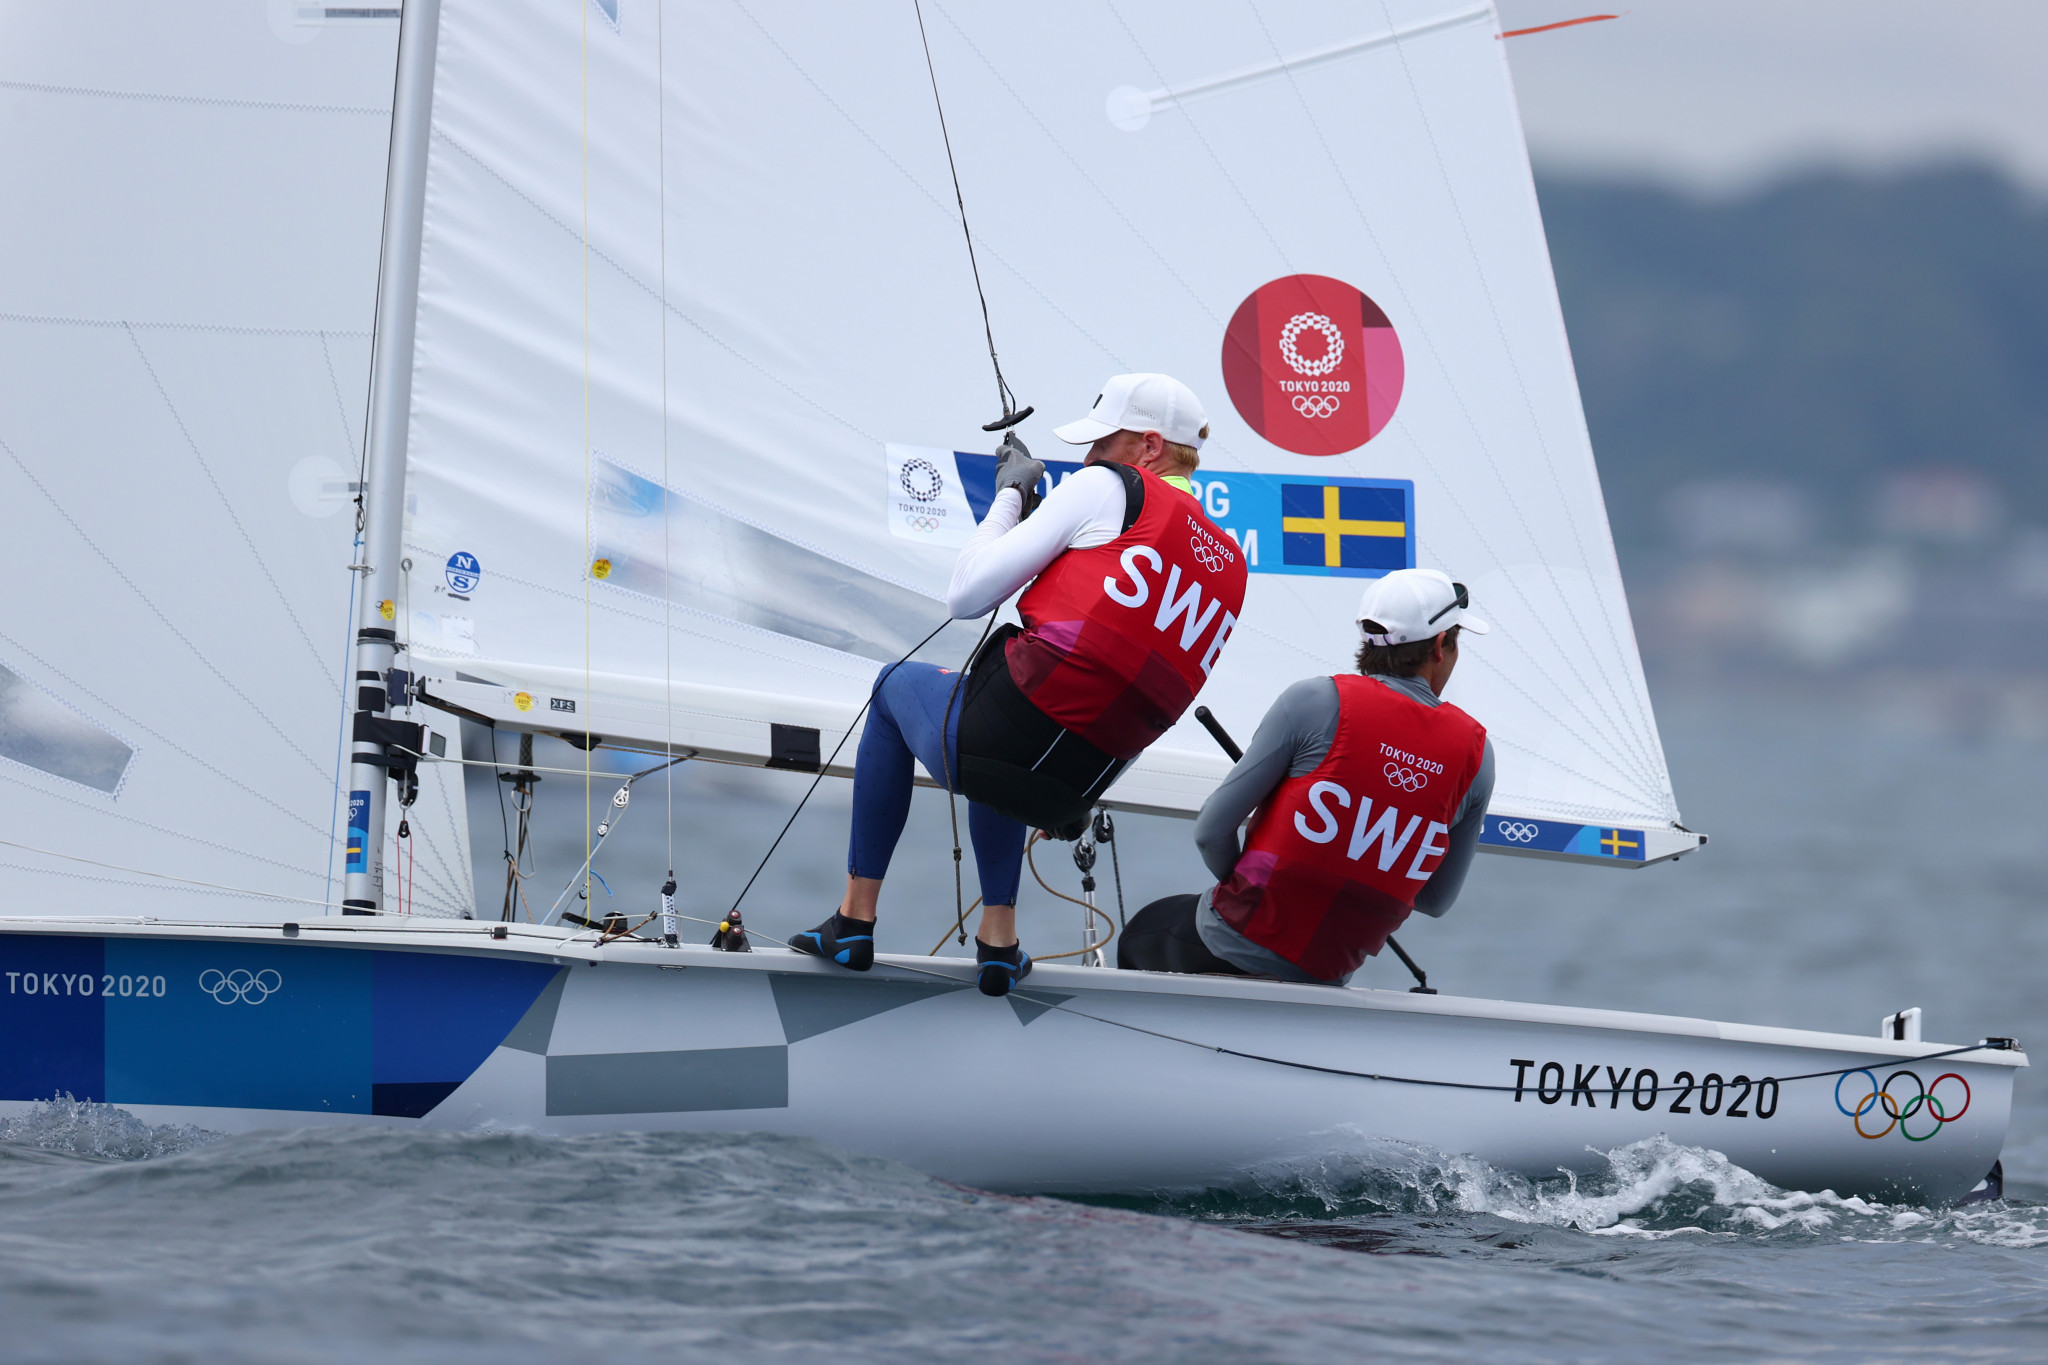 Anton Dahlberg won a sailing silver in the men's 470 class at Tokyo 2020 ©Getty Images